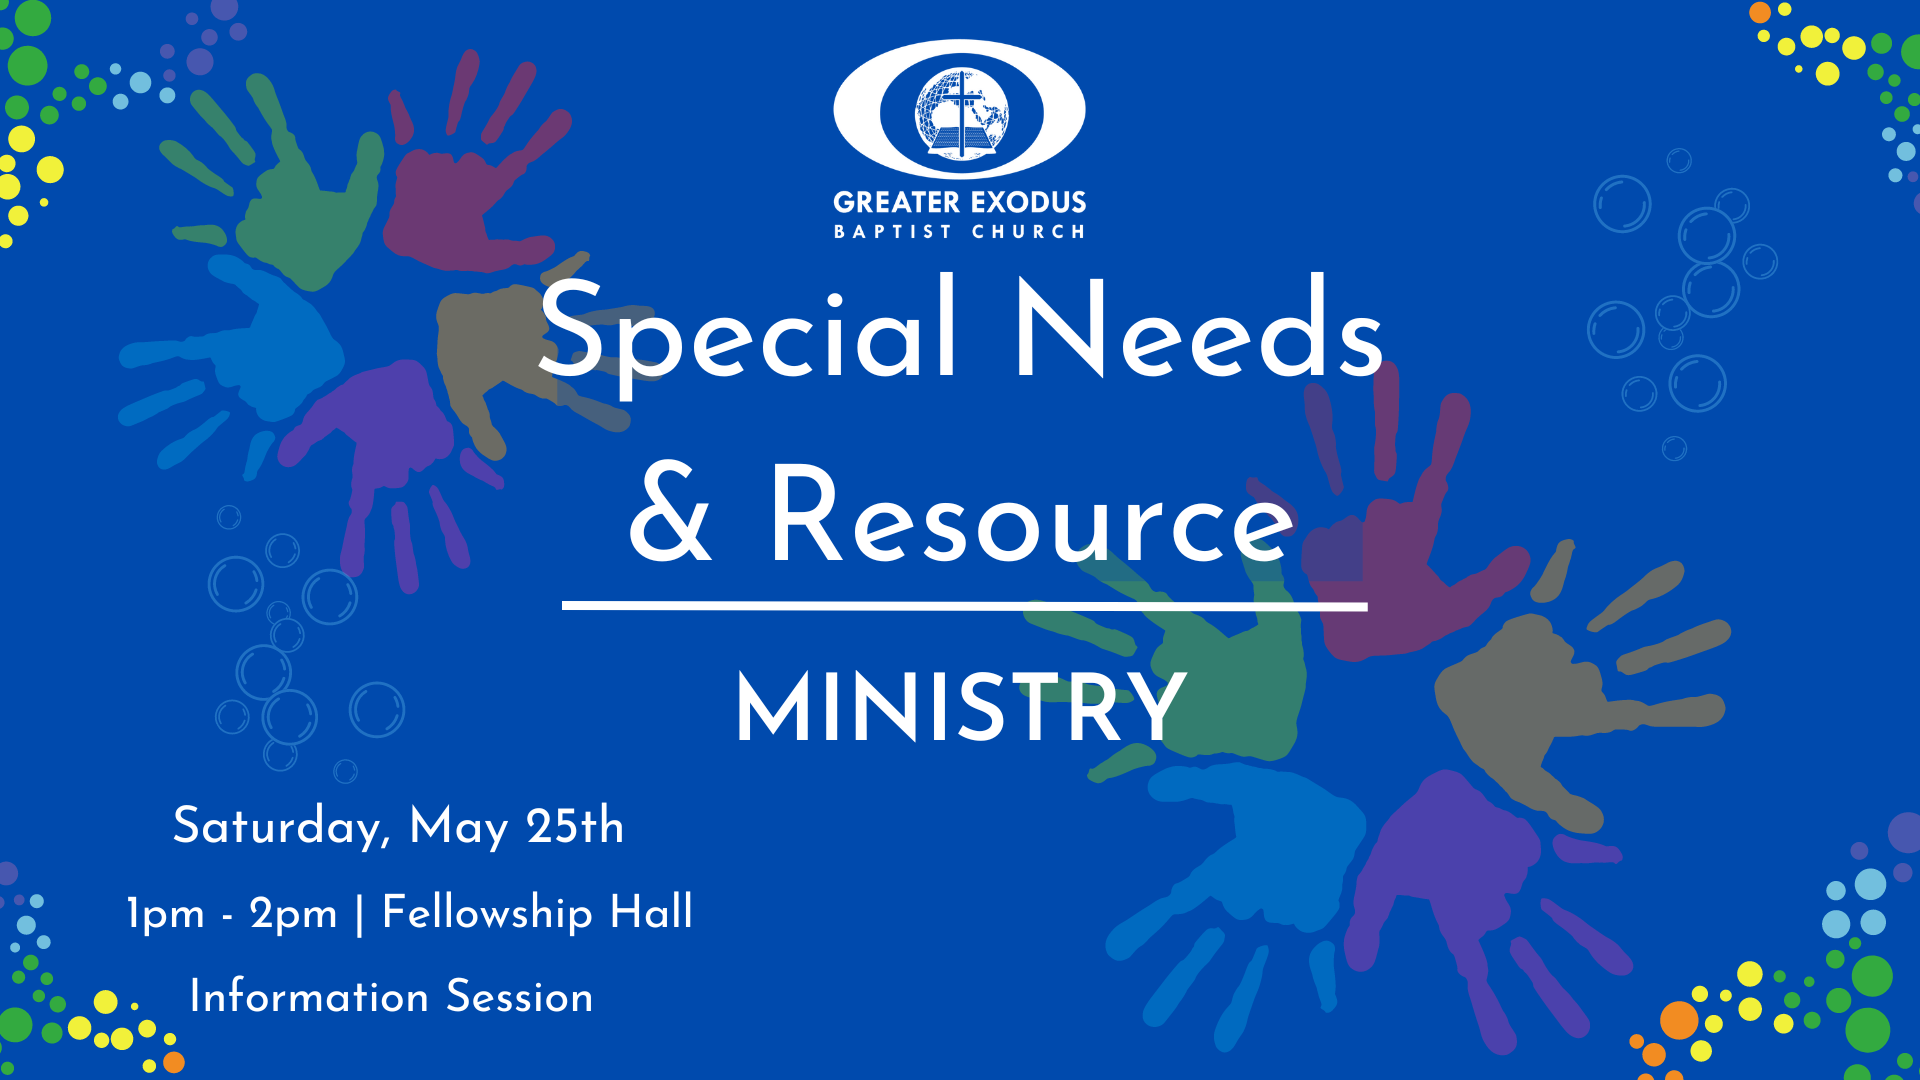 An advertisement for a special needs and resource ministry